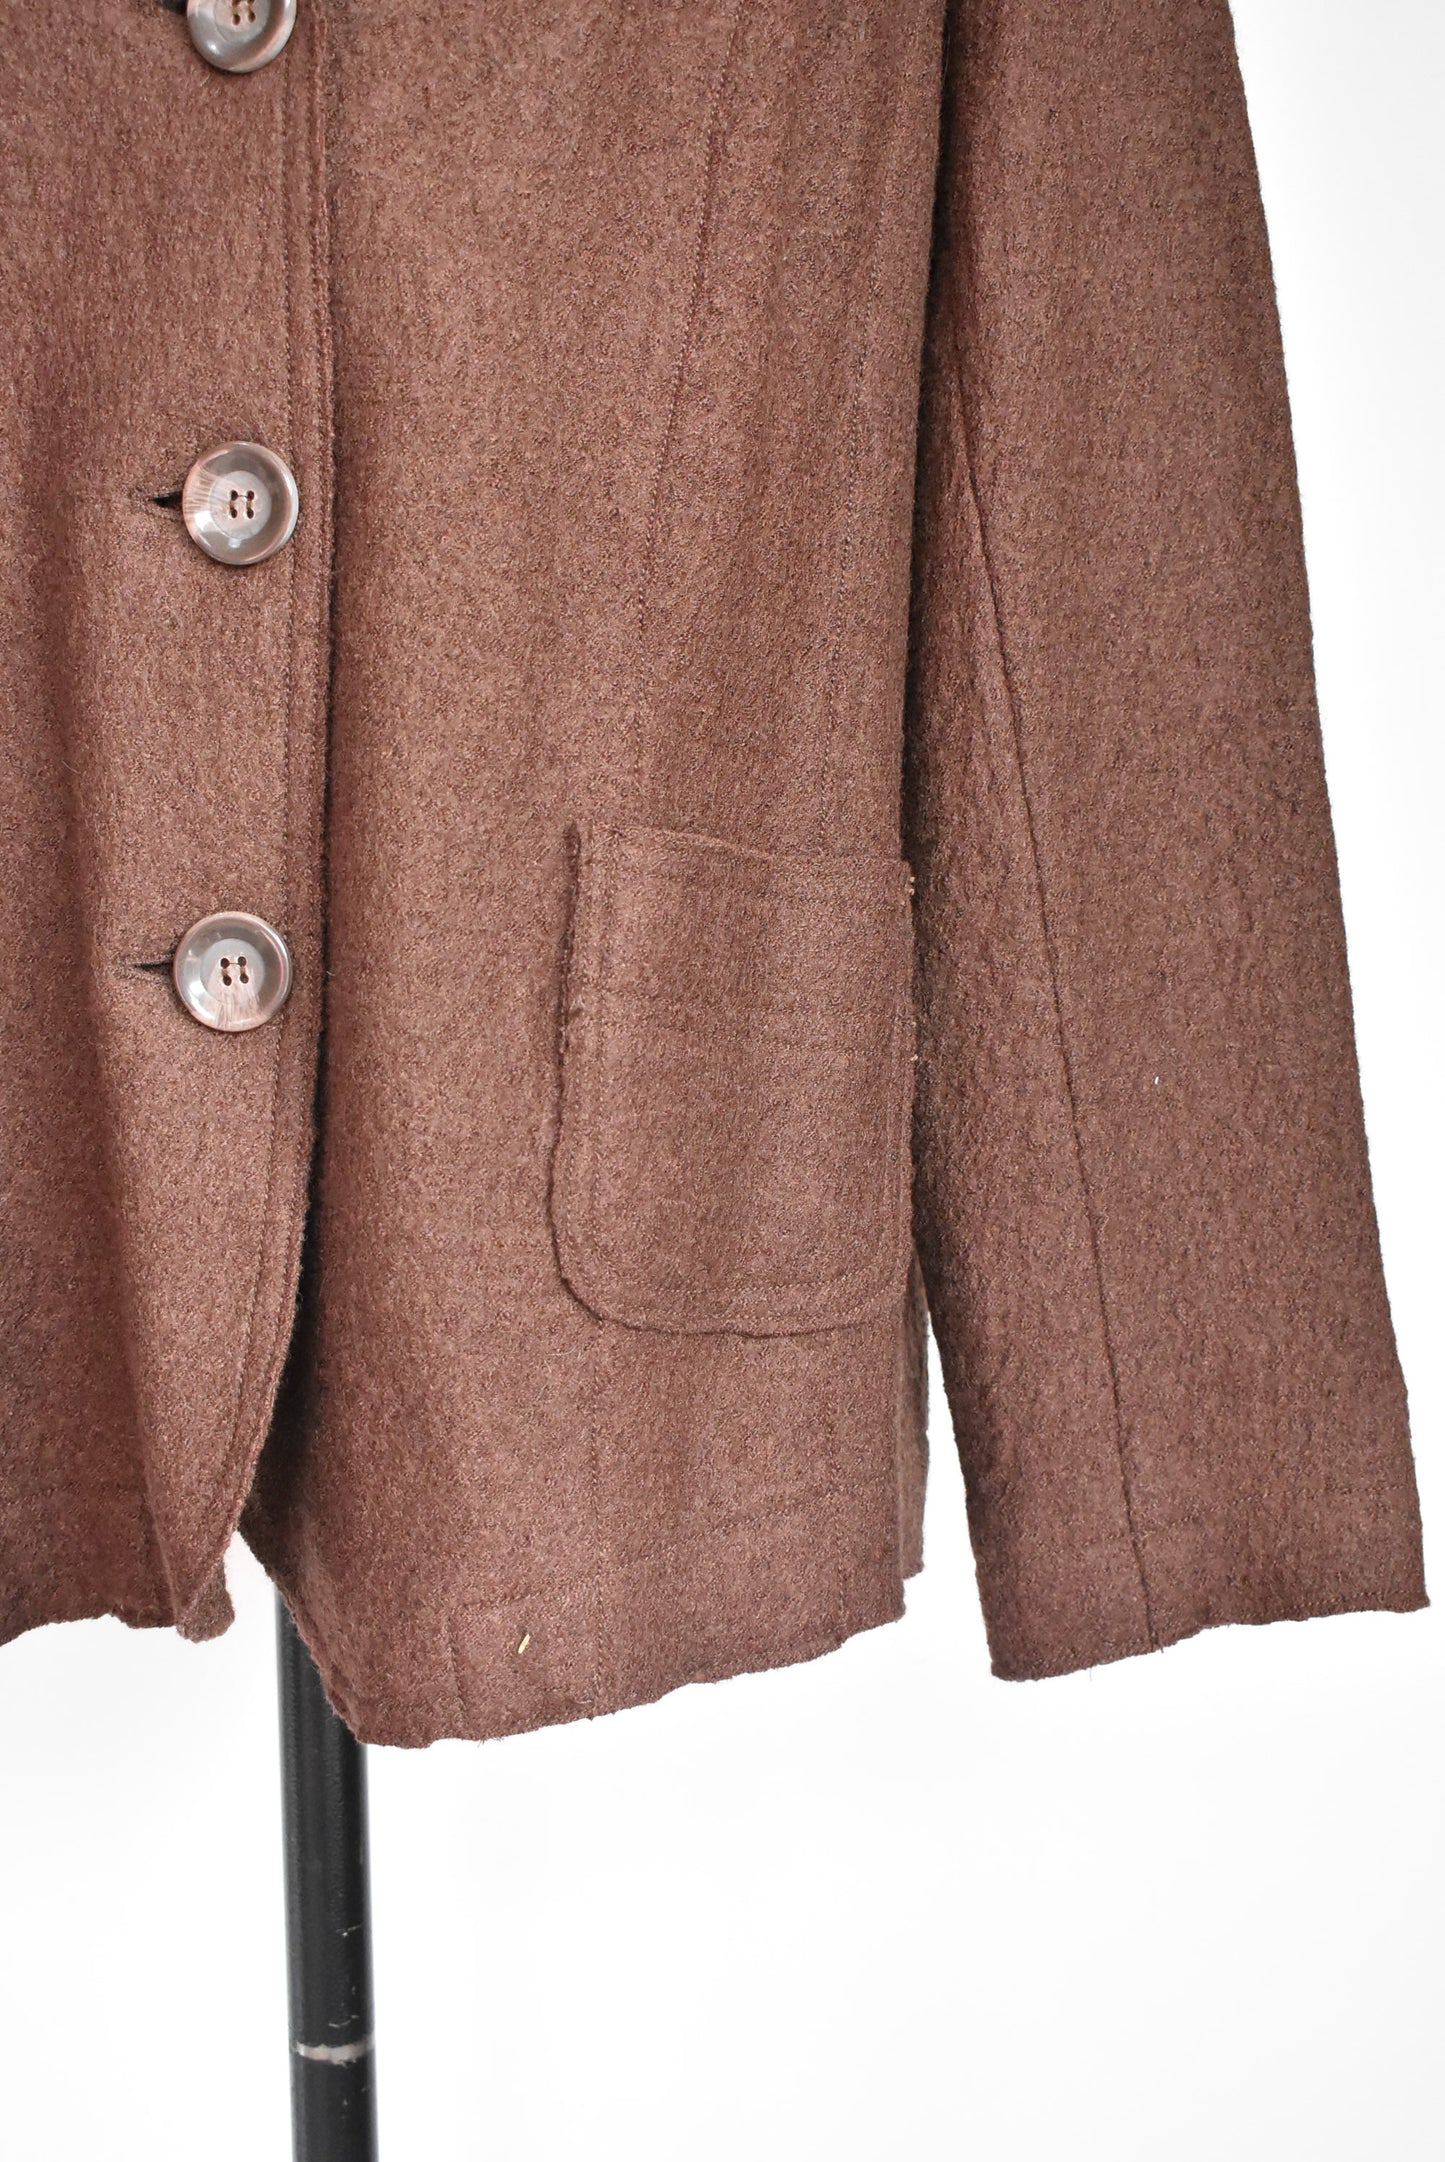 NEW Eve chocolate brown wool coat, size 48